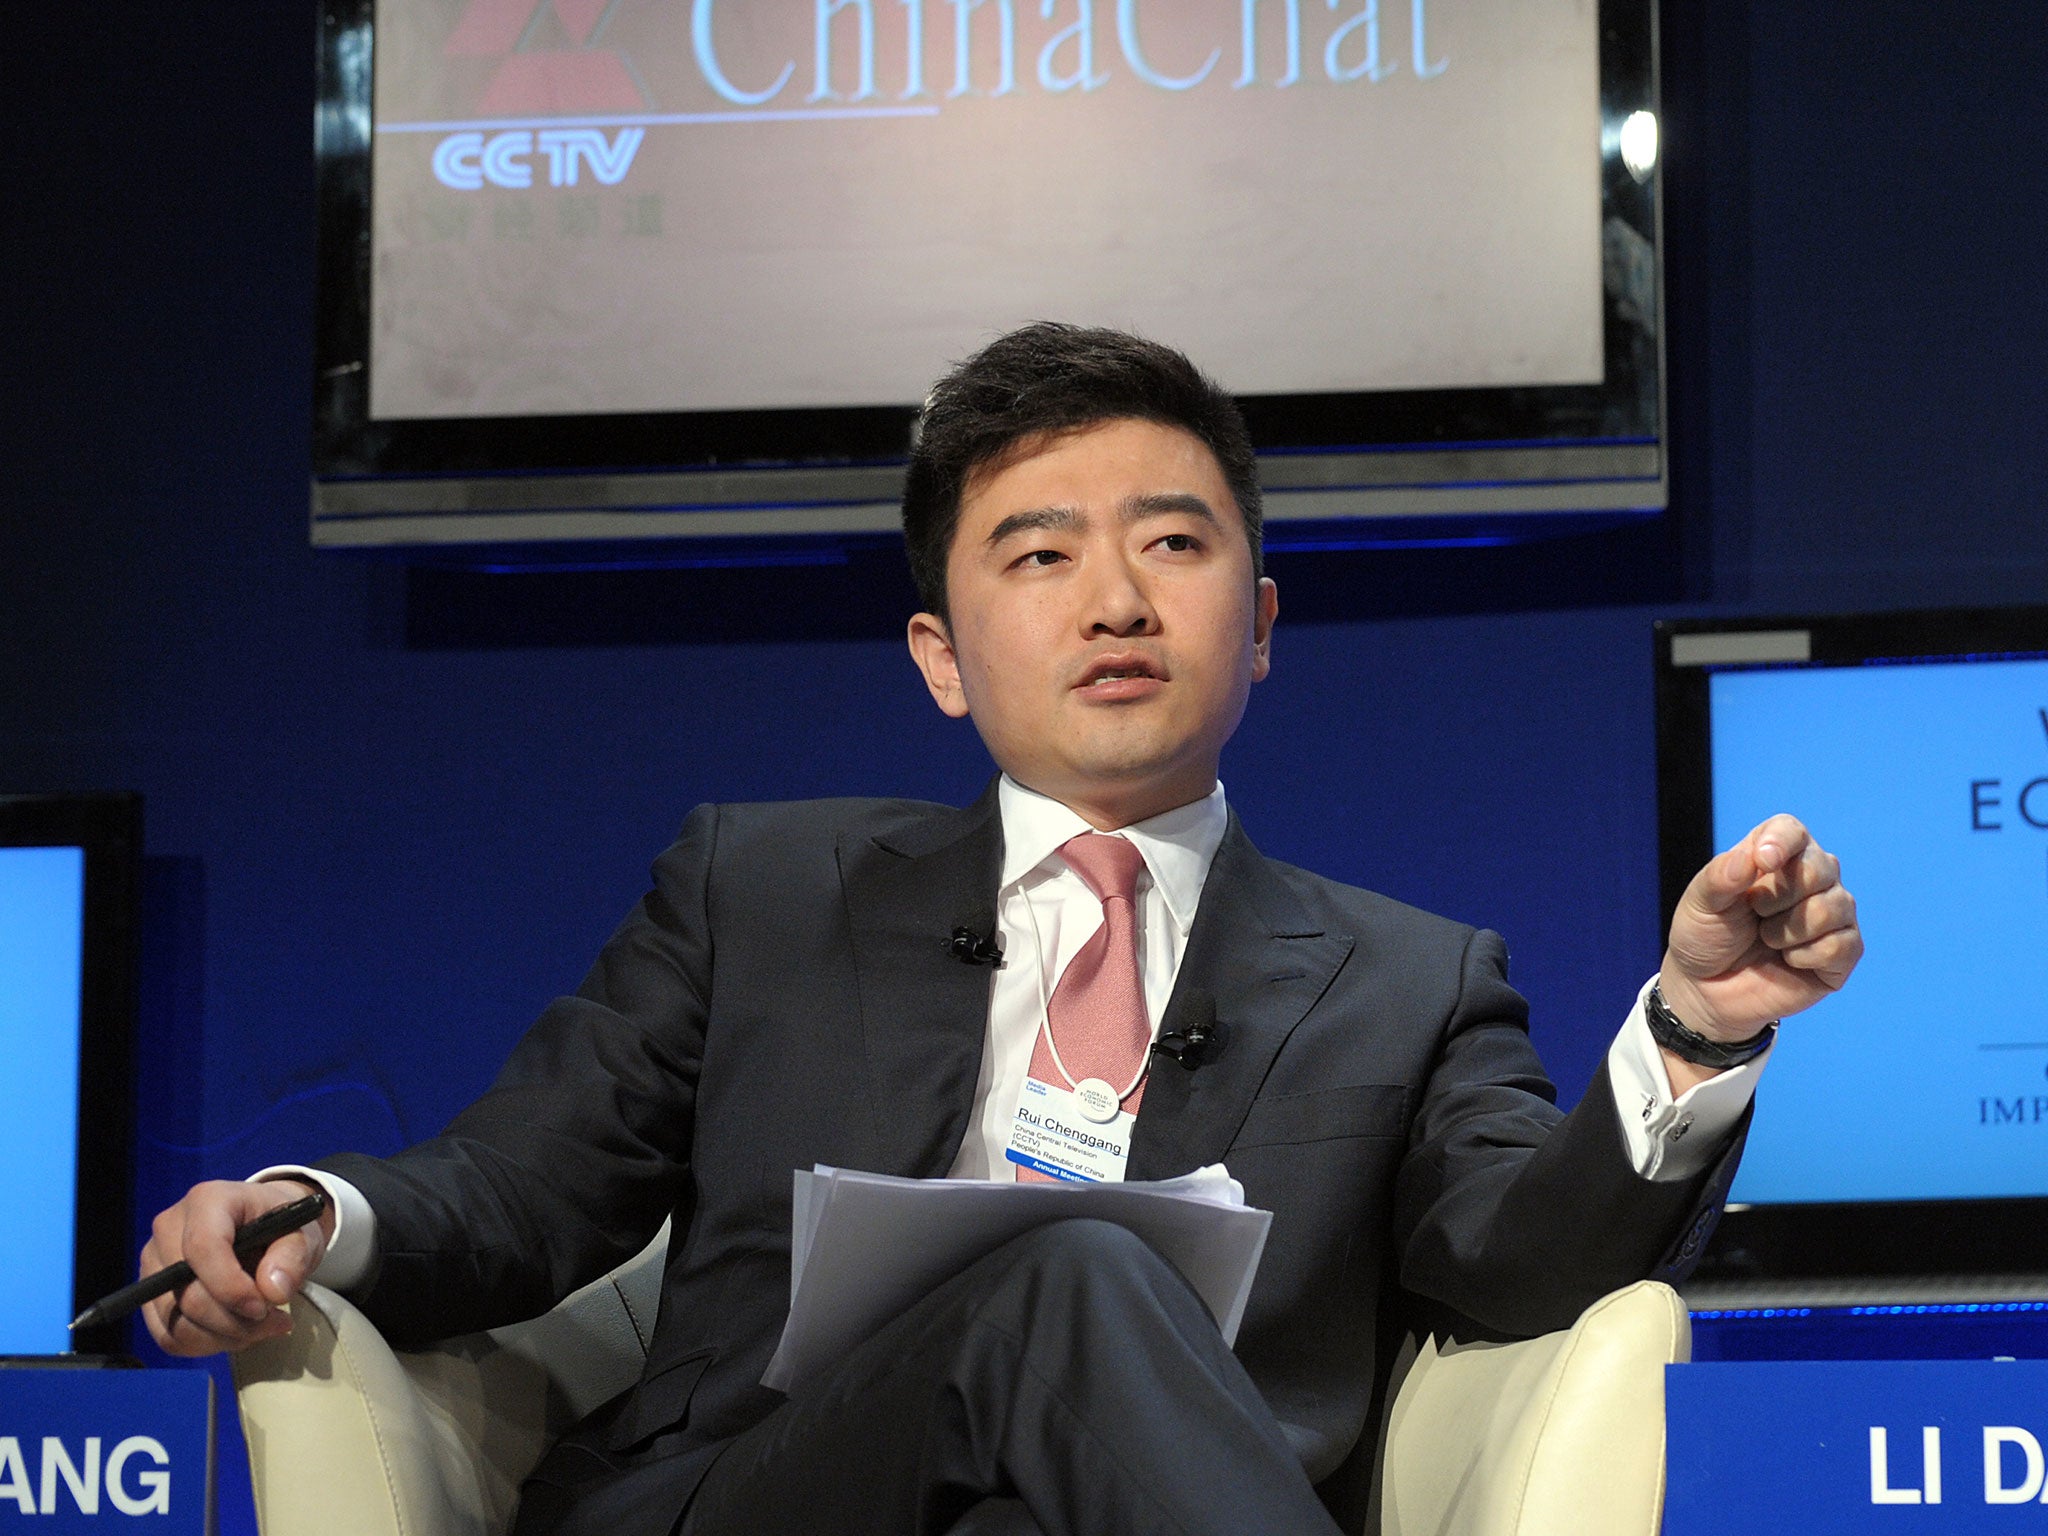 Chenggang had his most famous broadcasting moment when he questioned Barack Obama at the G20 Summit in 2010